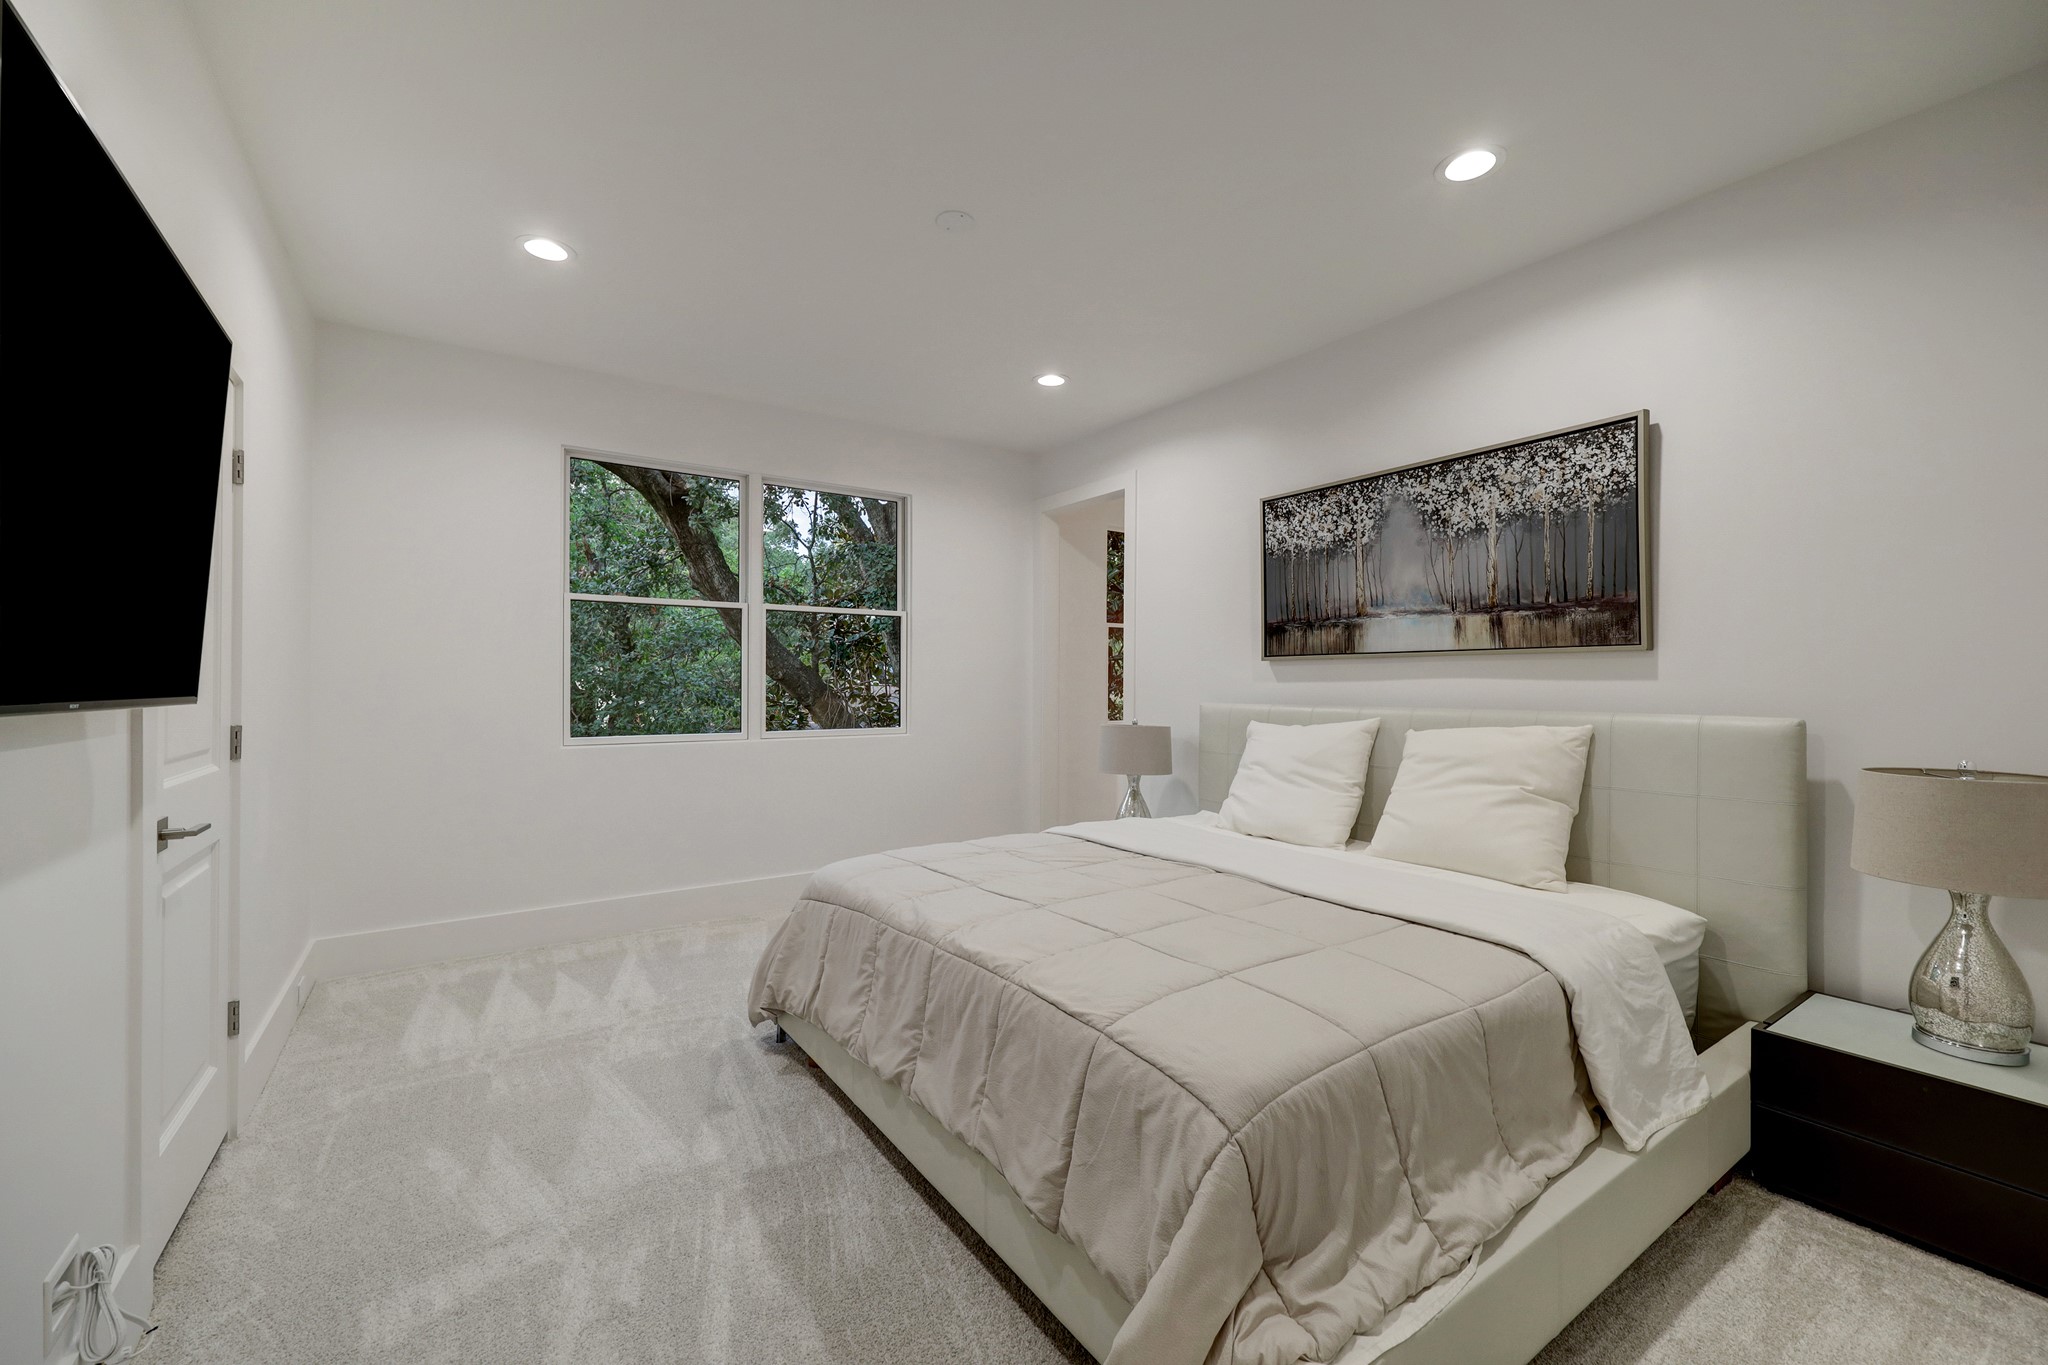 Another secondary bedroom that connects to the conjoining / Hollywood ensuite bathroom.